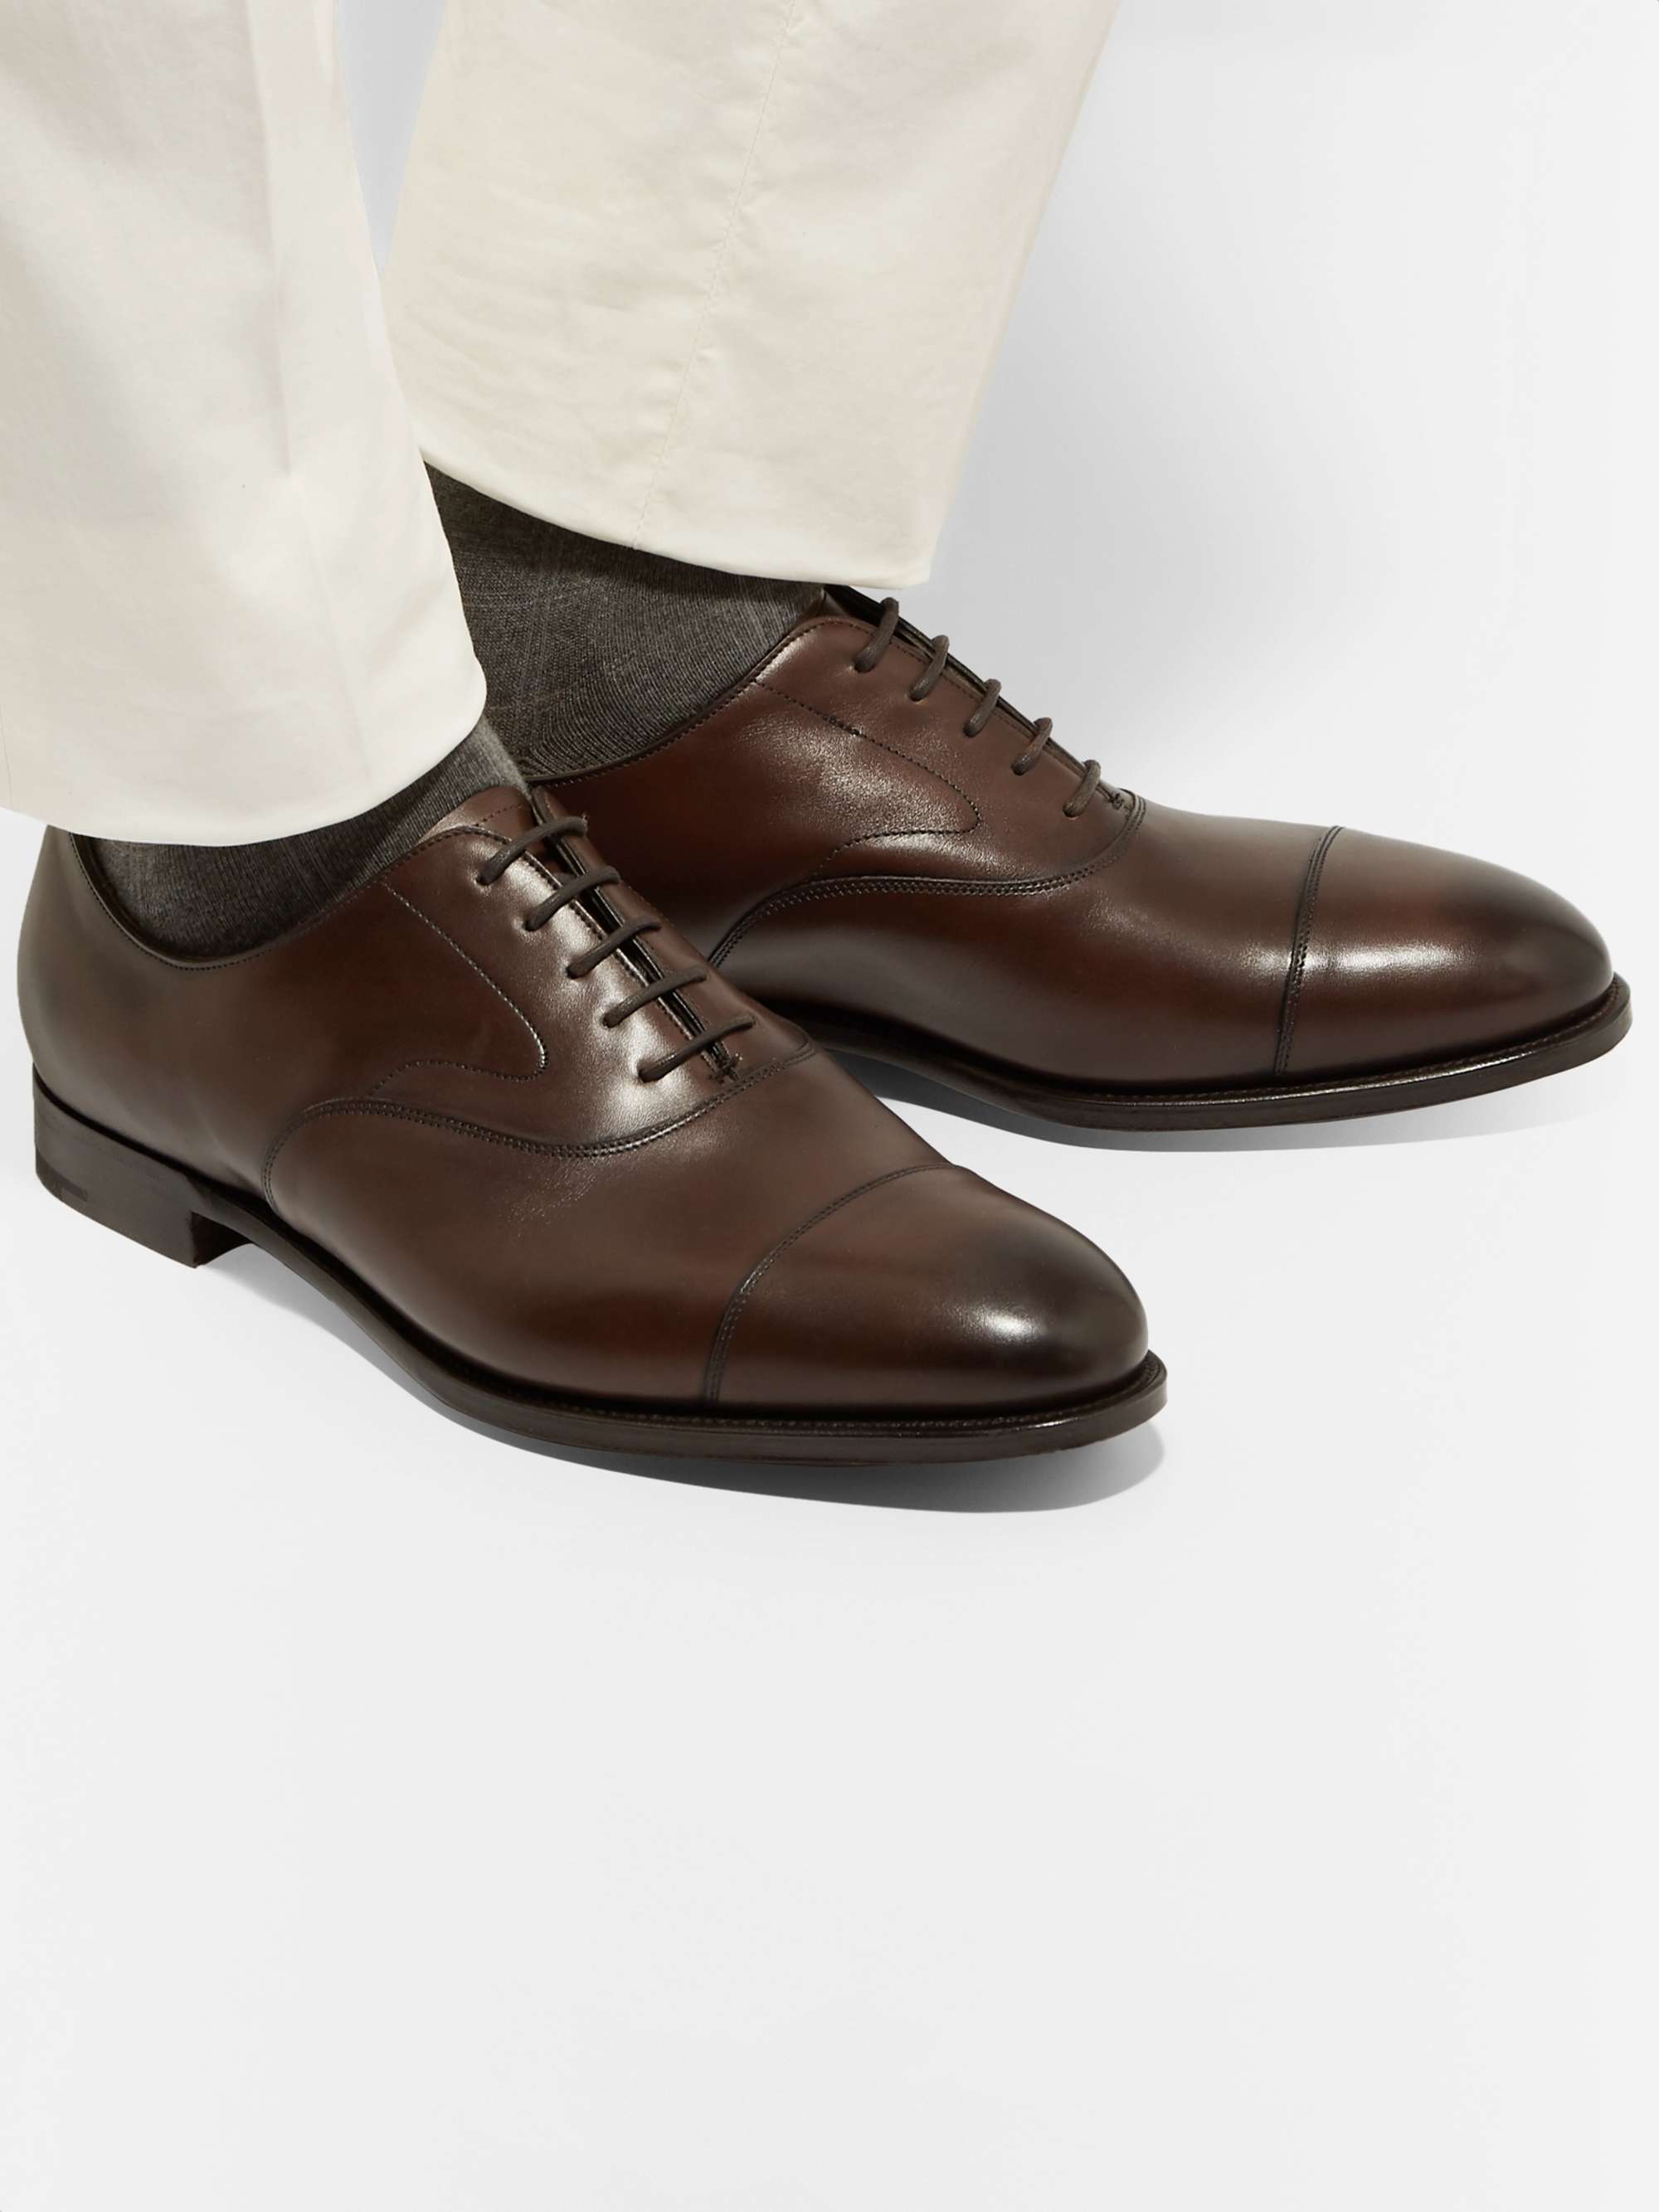 EDWARD GREEN Chelsea Cap-Toe Burnished-Leather Oxford Shoes